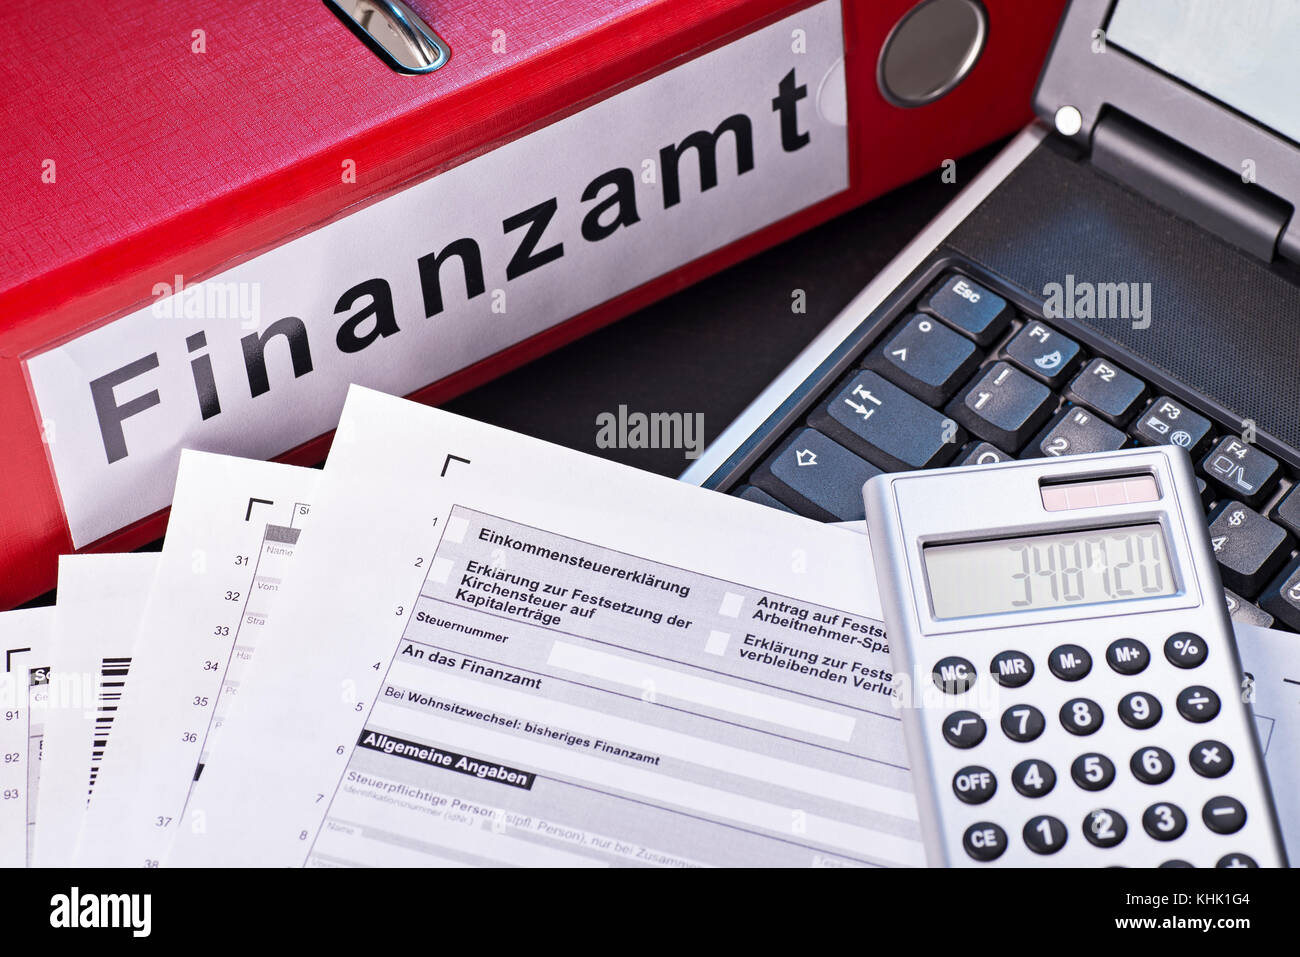 File folder labeled 'Finanzamt' (tax office), forms, calculators and a computer as a symbol for the preparation of the tax return. Stock Photo